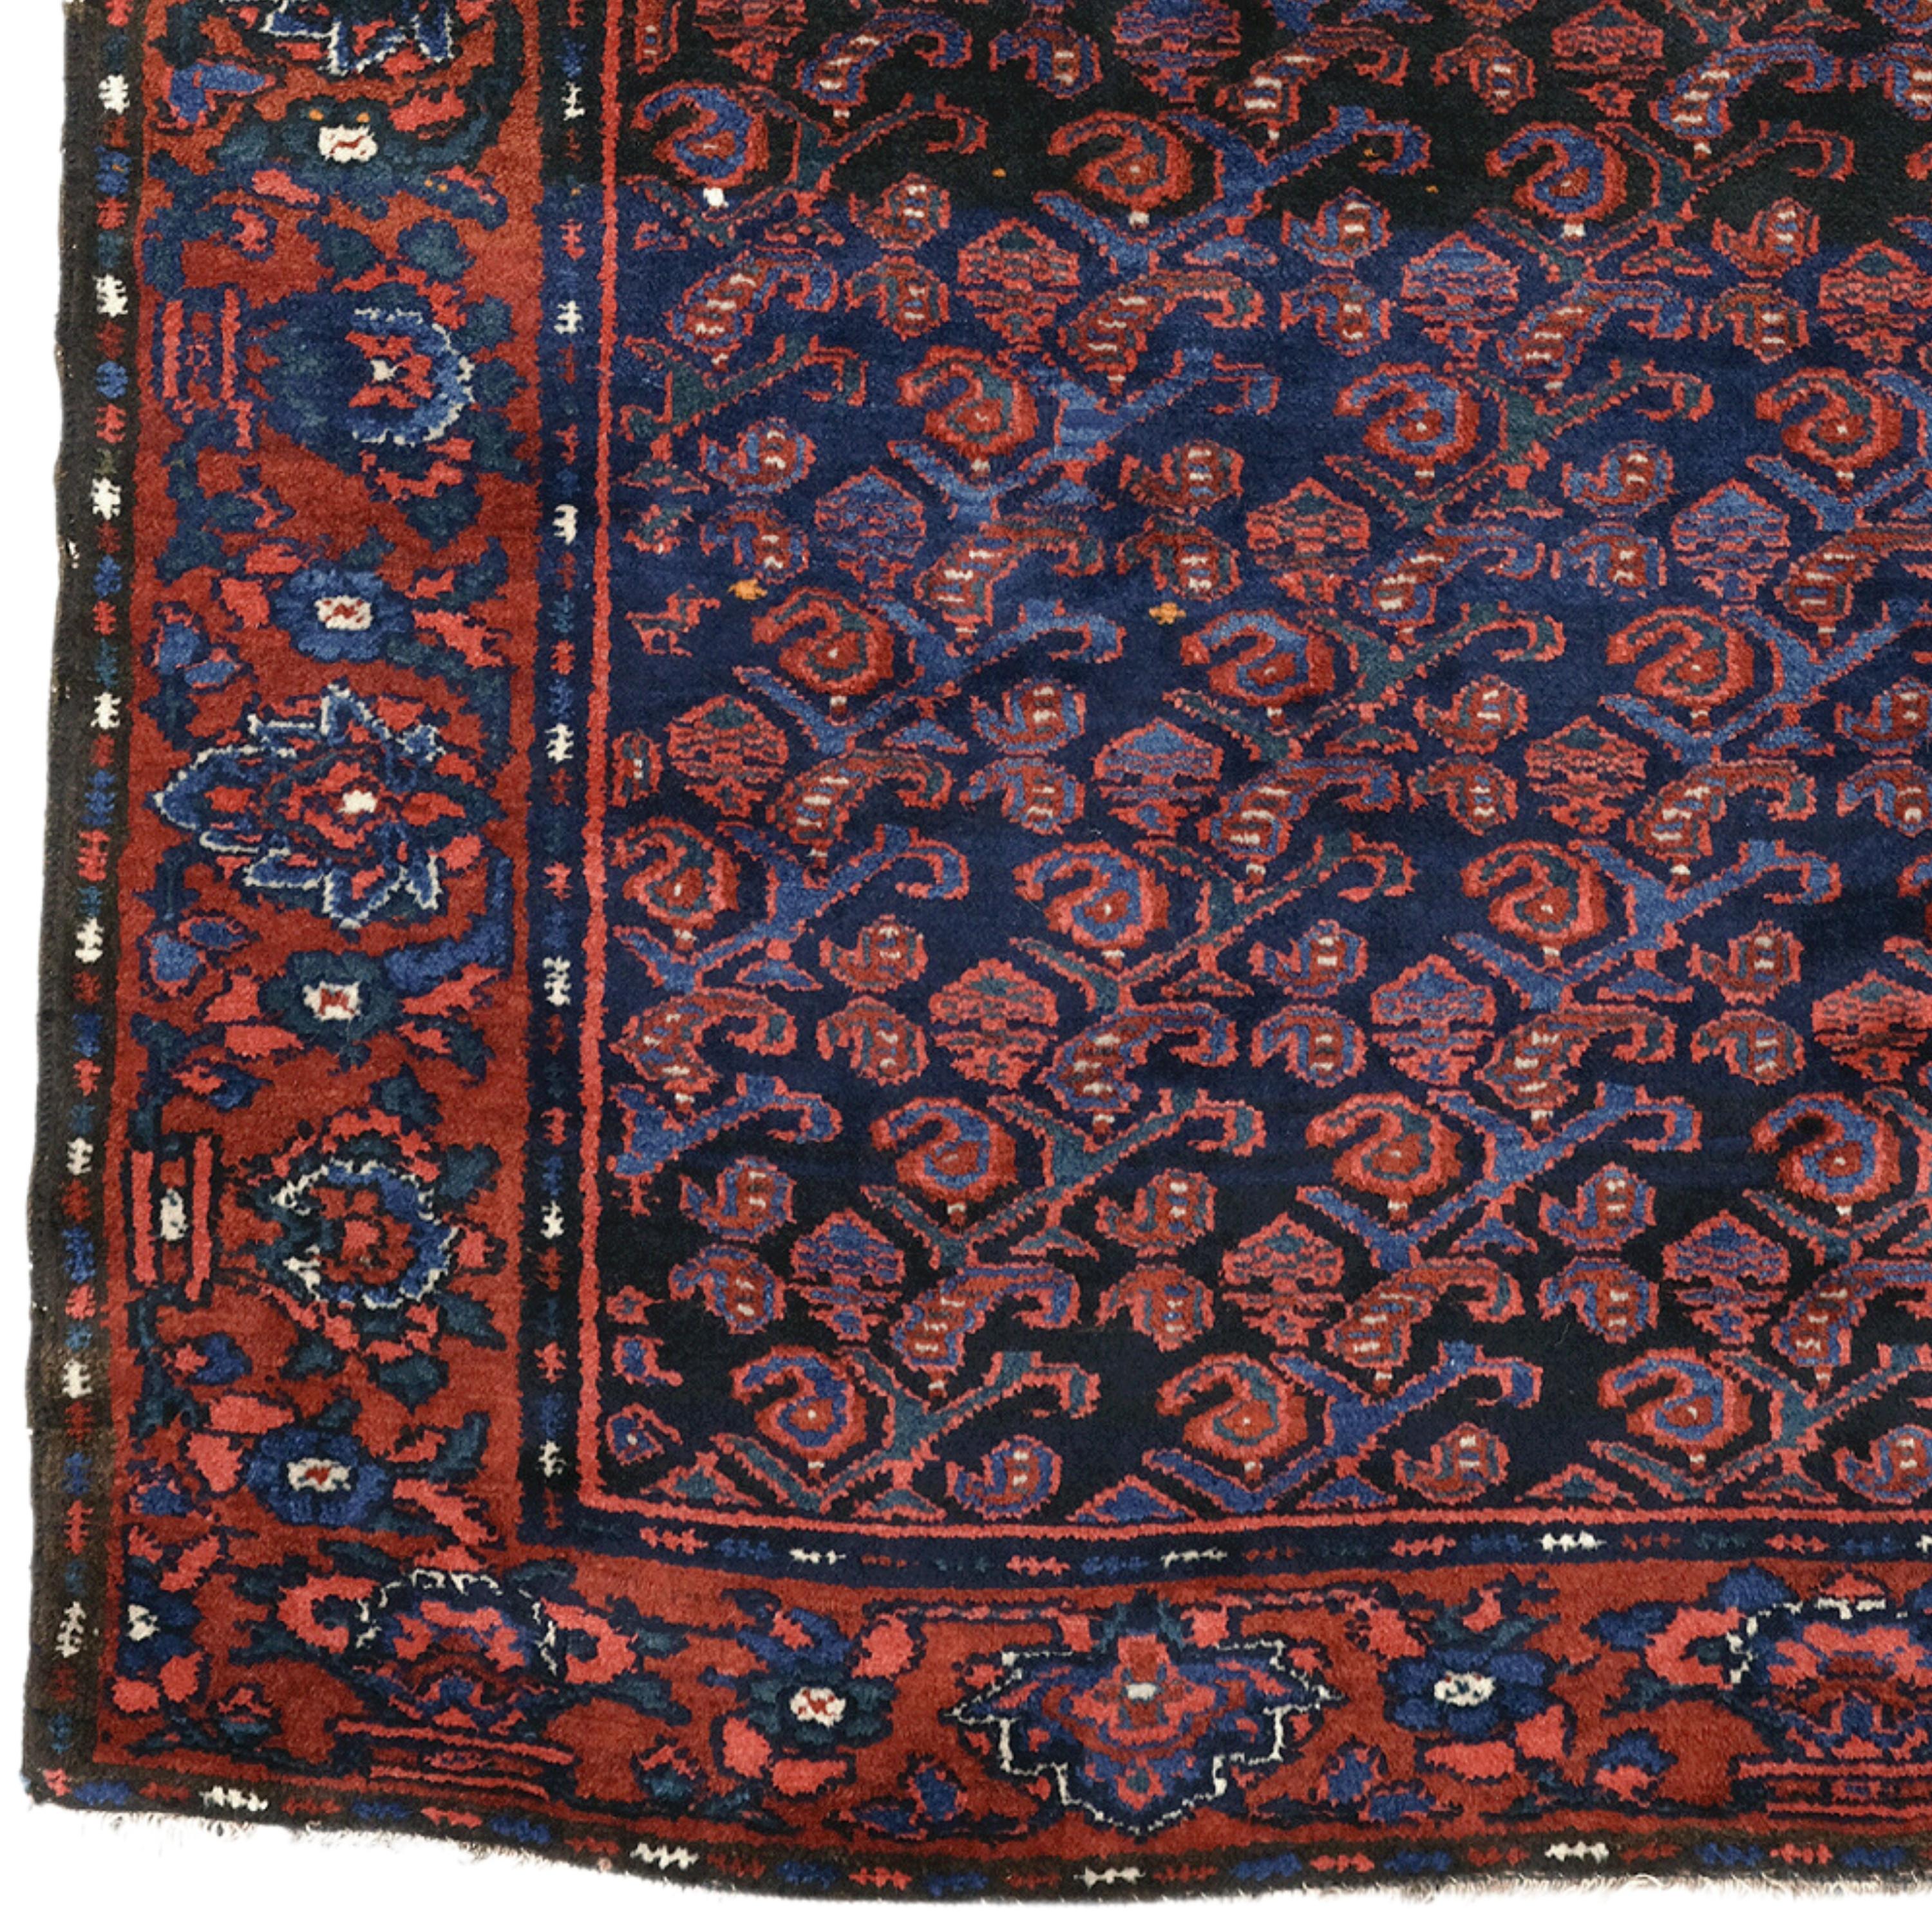 This elegant 19th-century Kurdish rug will add nobility to every corner of your home with its carefully woven details and rich color palette. This unique piece, reflecting the Ottoman period, is one of the most beautiful examples of